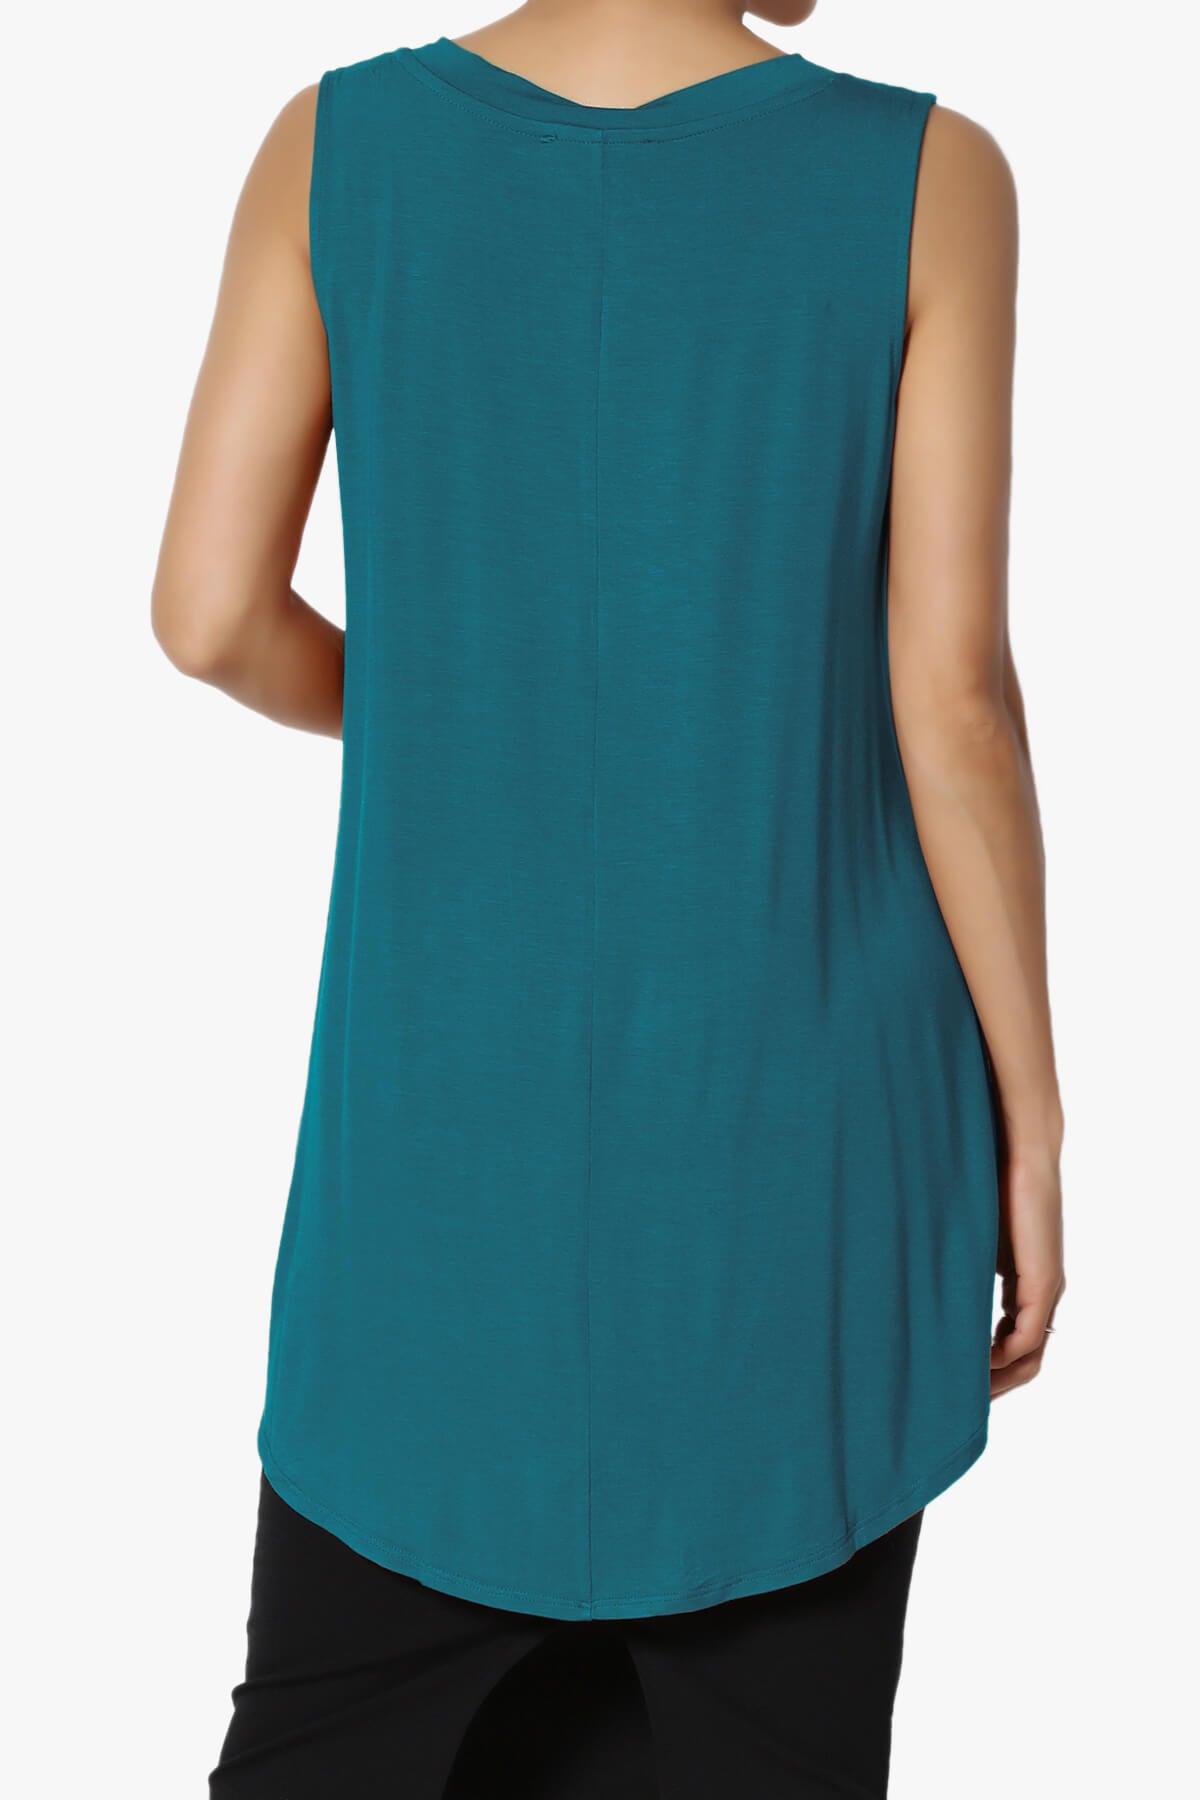 Myles Sleeveless V-Neck Luxe Jersey Top TEAL_2